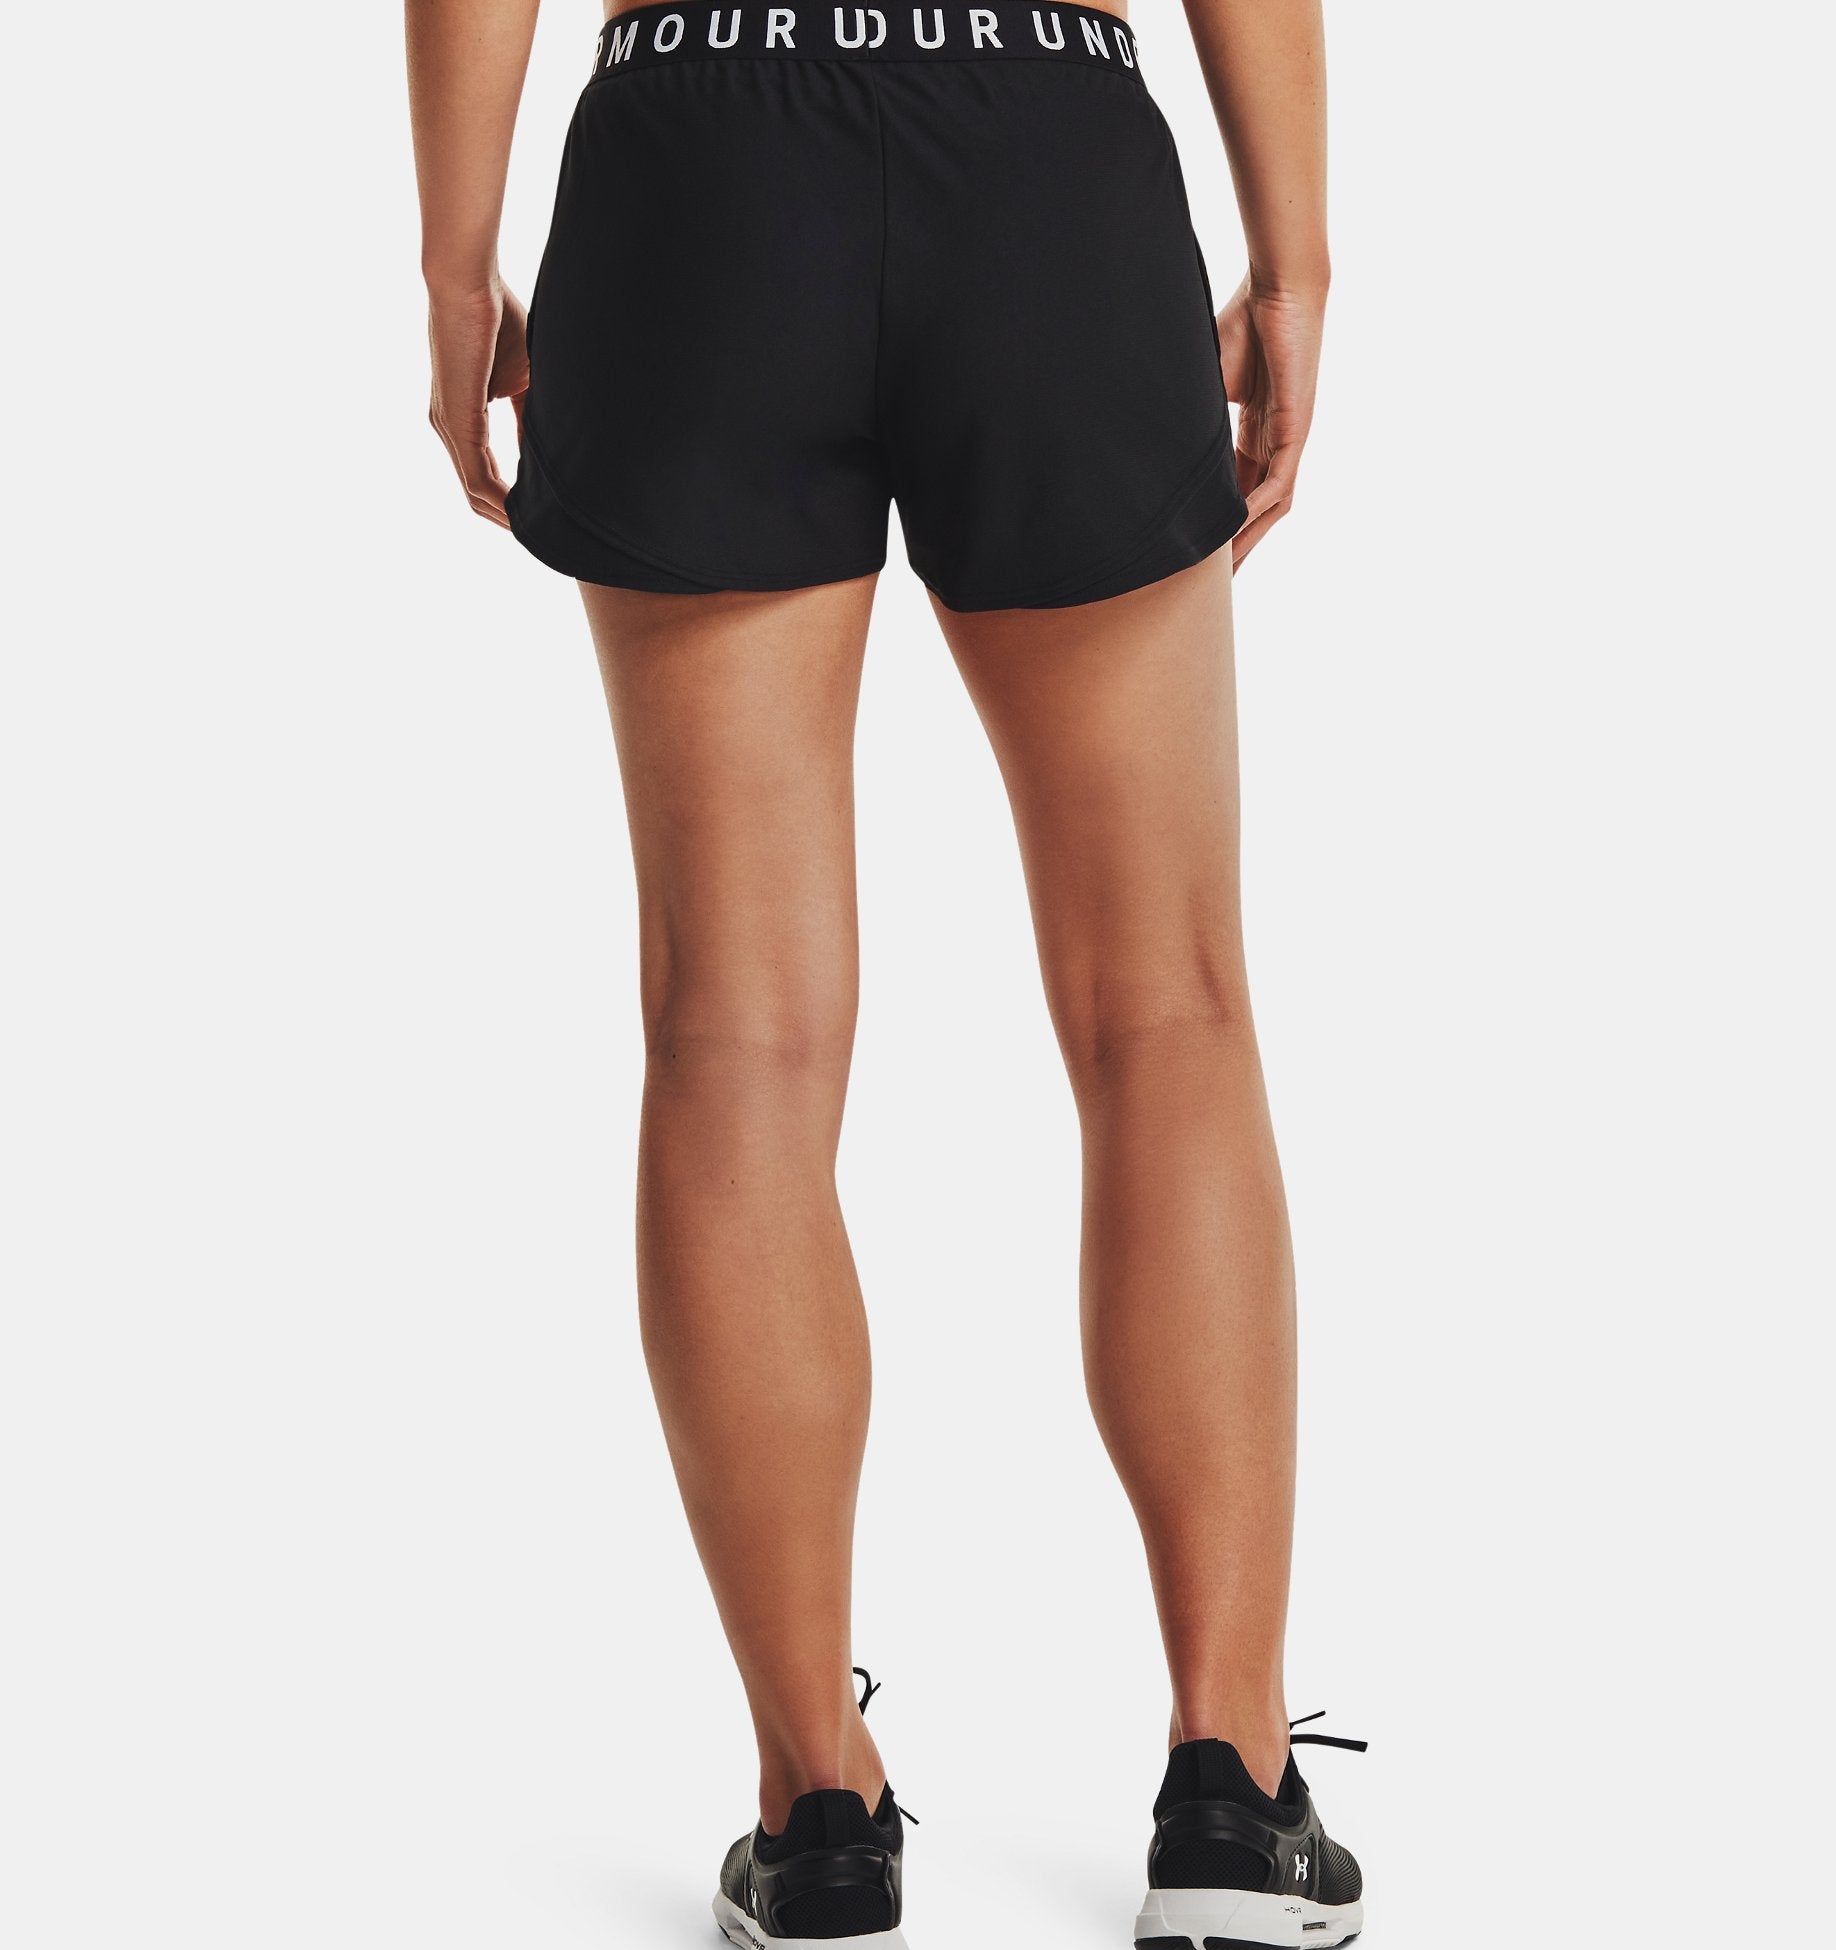 Under Armour Ladies New Freedom Playup Short (OD Green)